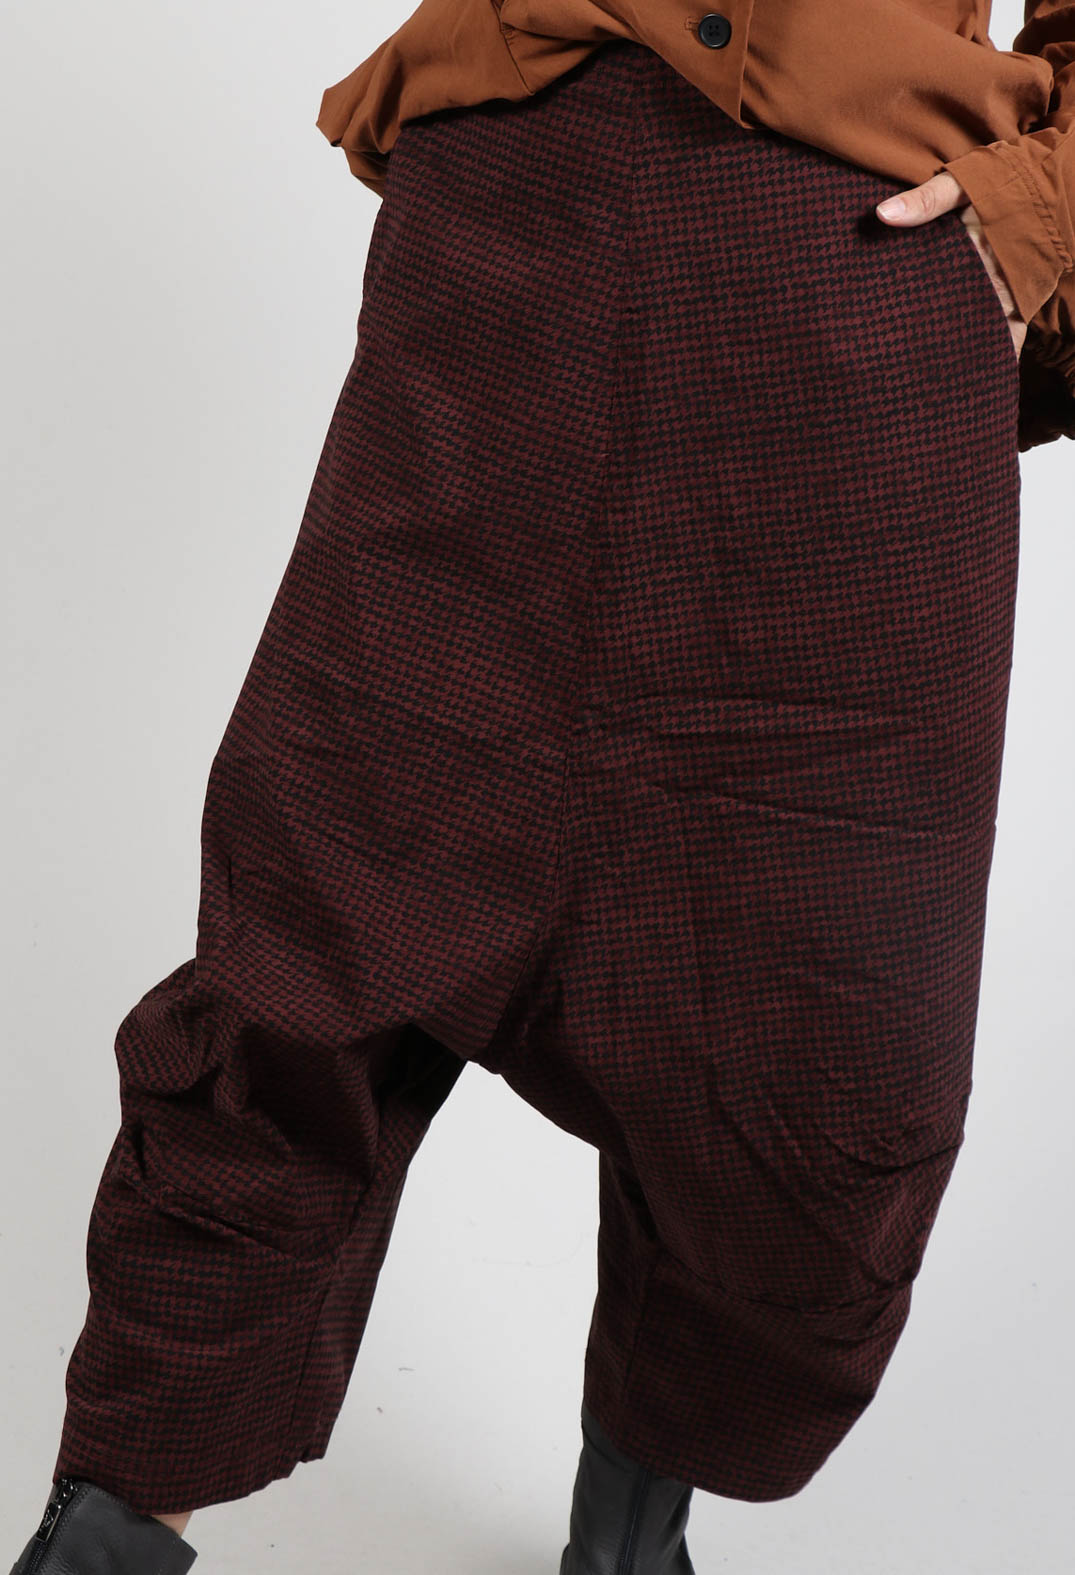 Drop Crotch Trousers in Wood Print